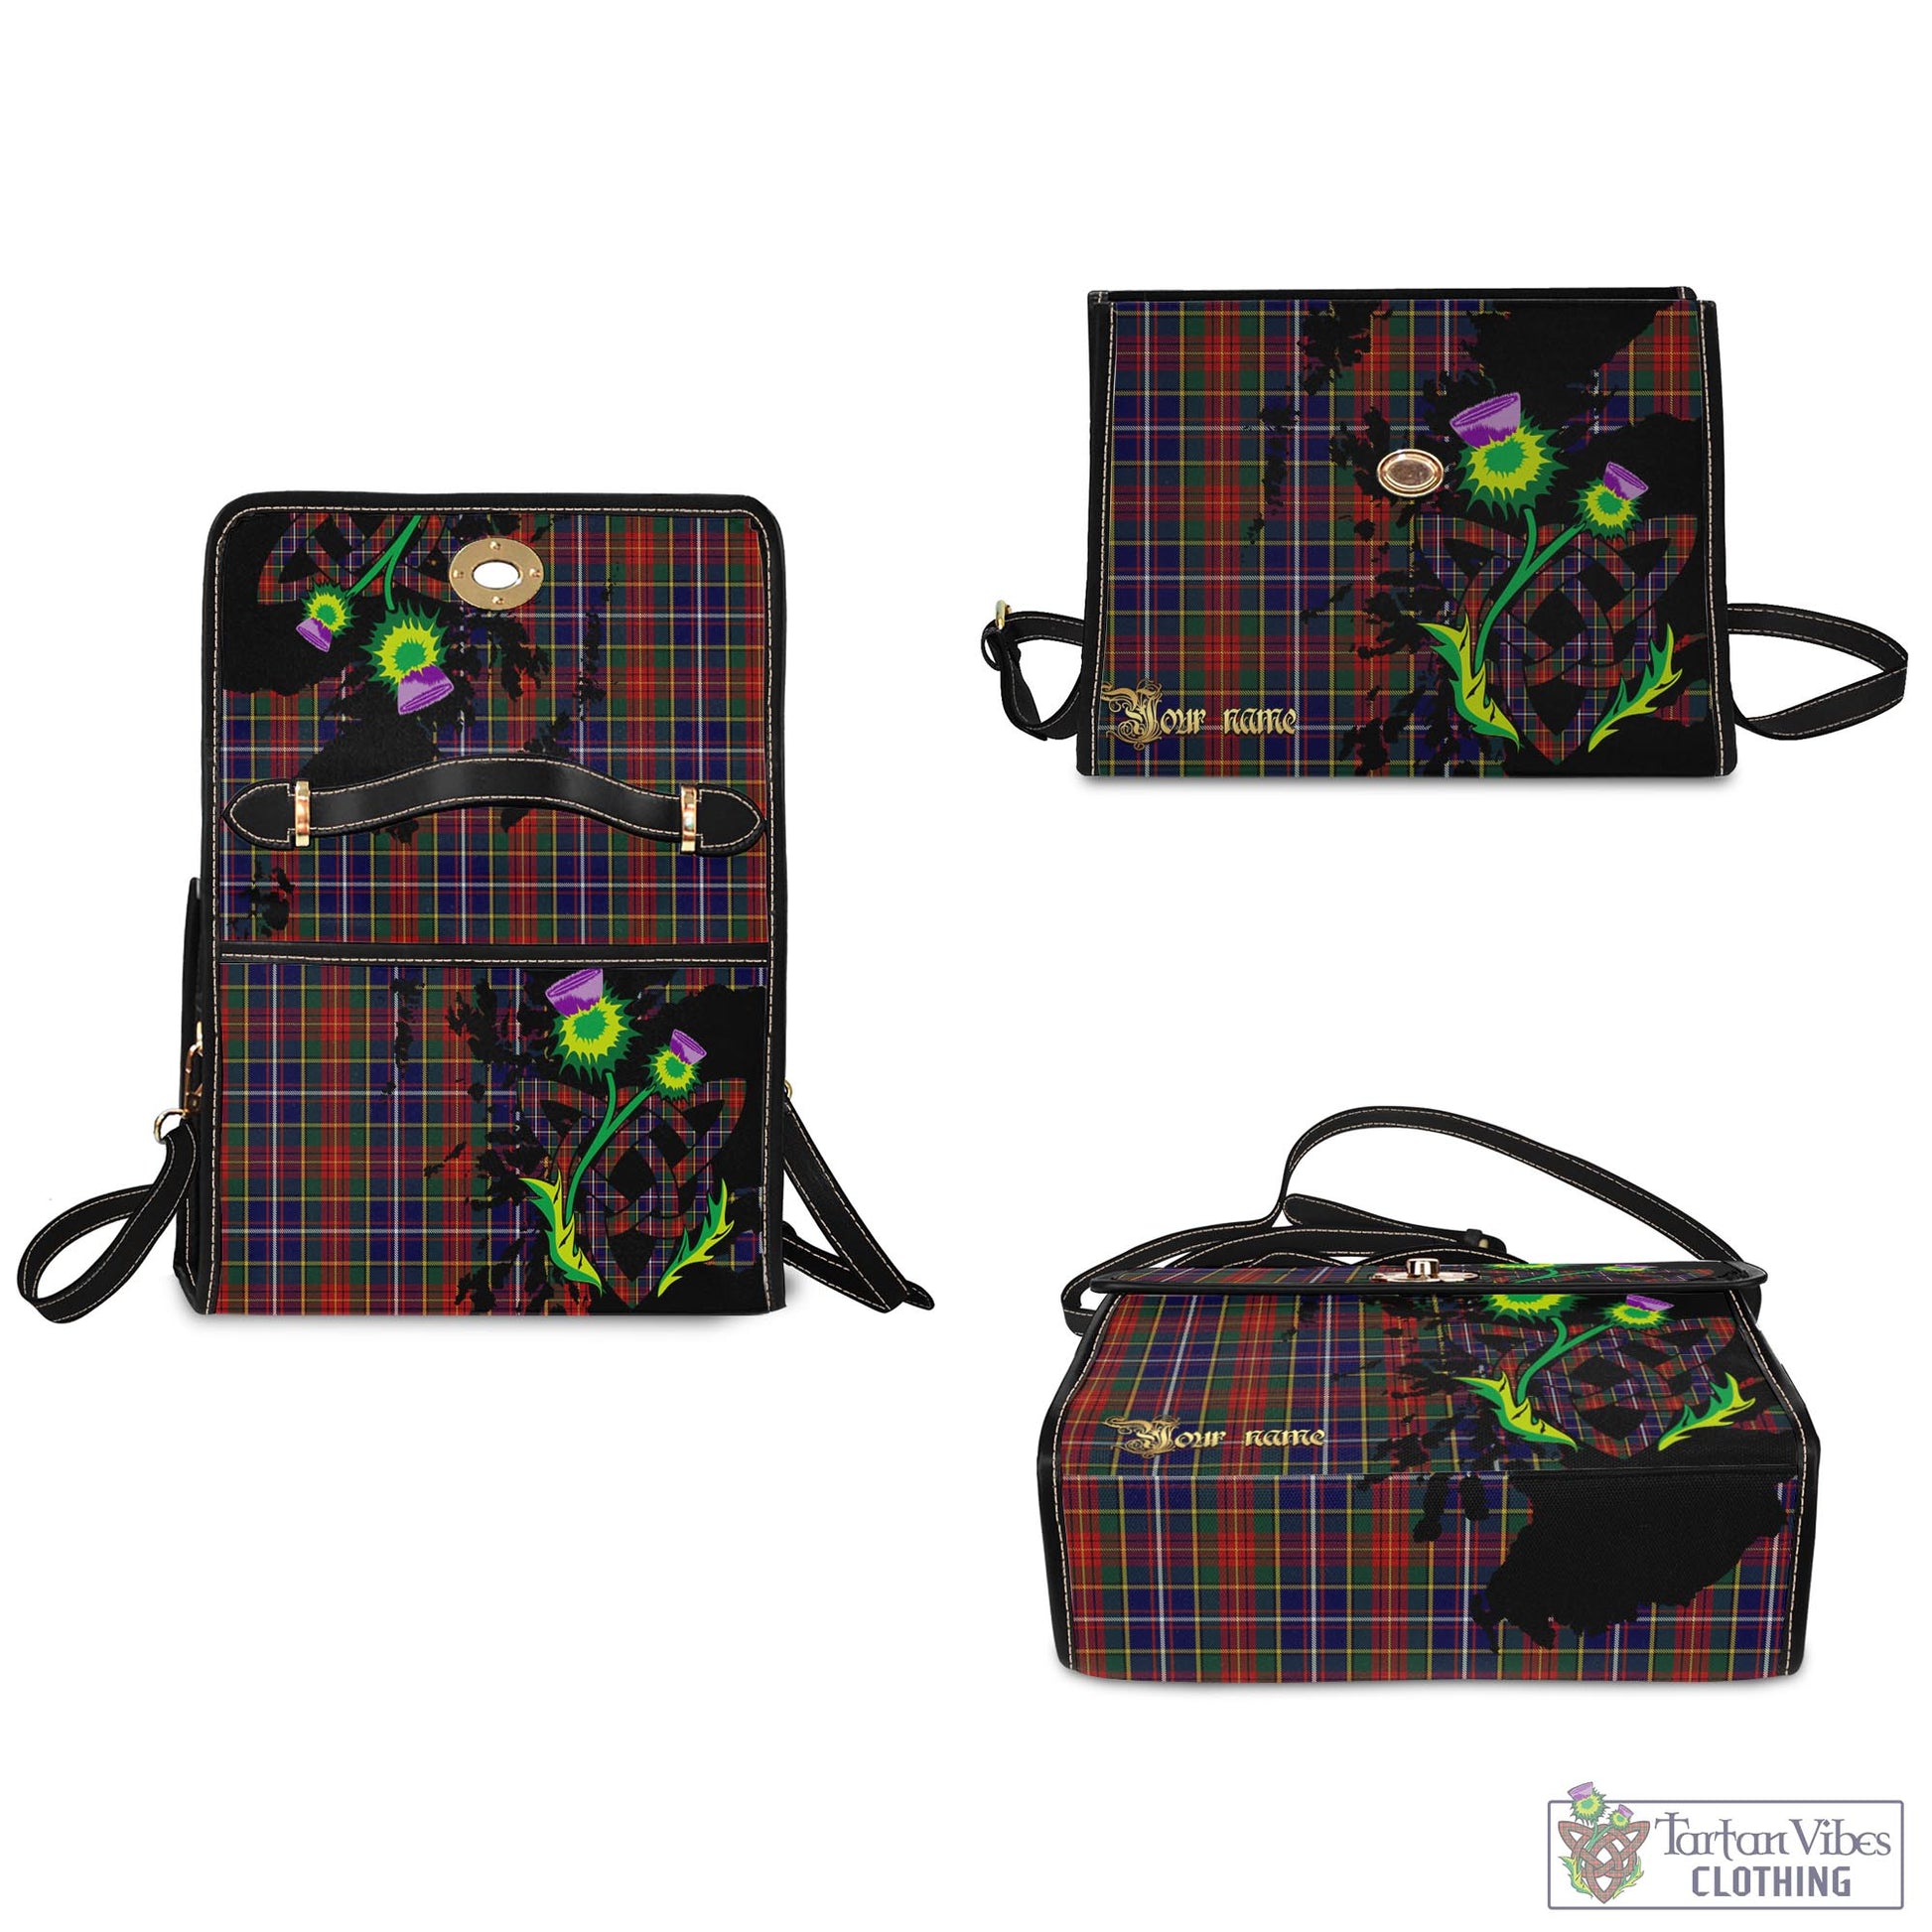 Tartan Vibes Clothing Crozier Tartan Waterproof Canvas Bag with Scotland Map and Thistle Celtic Accents